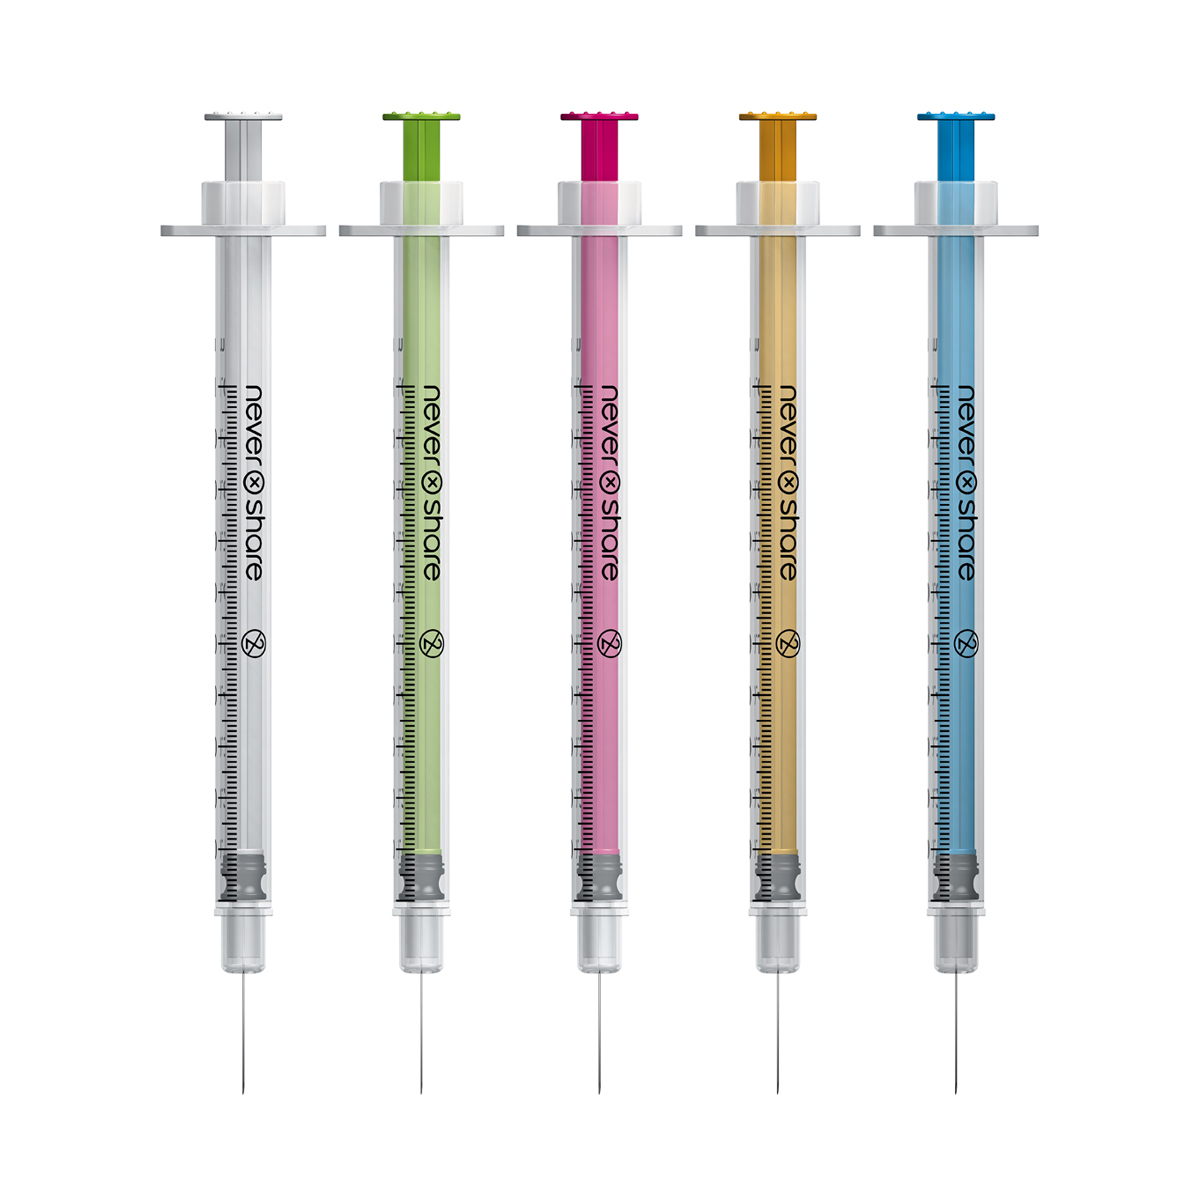 Nevershare 1ml 30G fixed needle syringe: mixed colours (discontinued, see below)